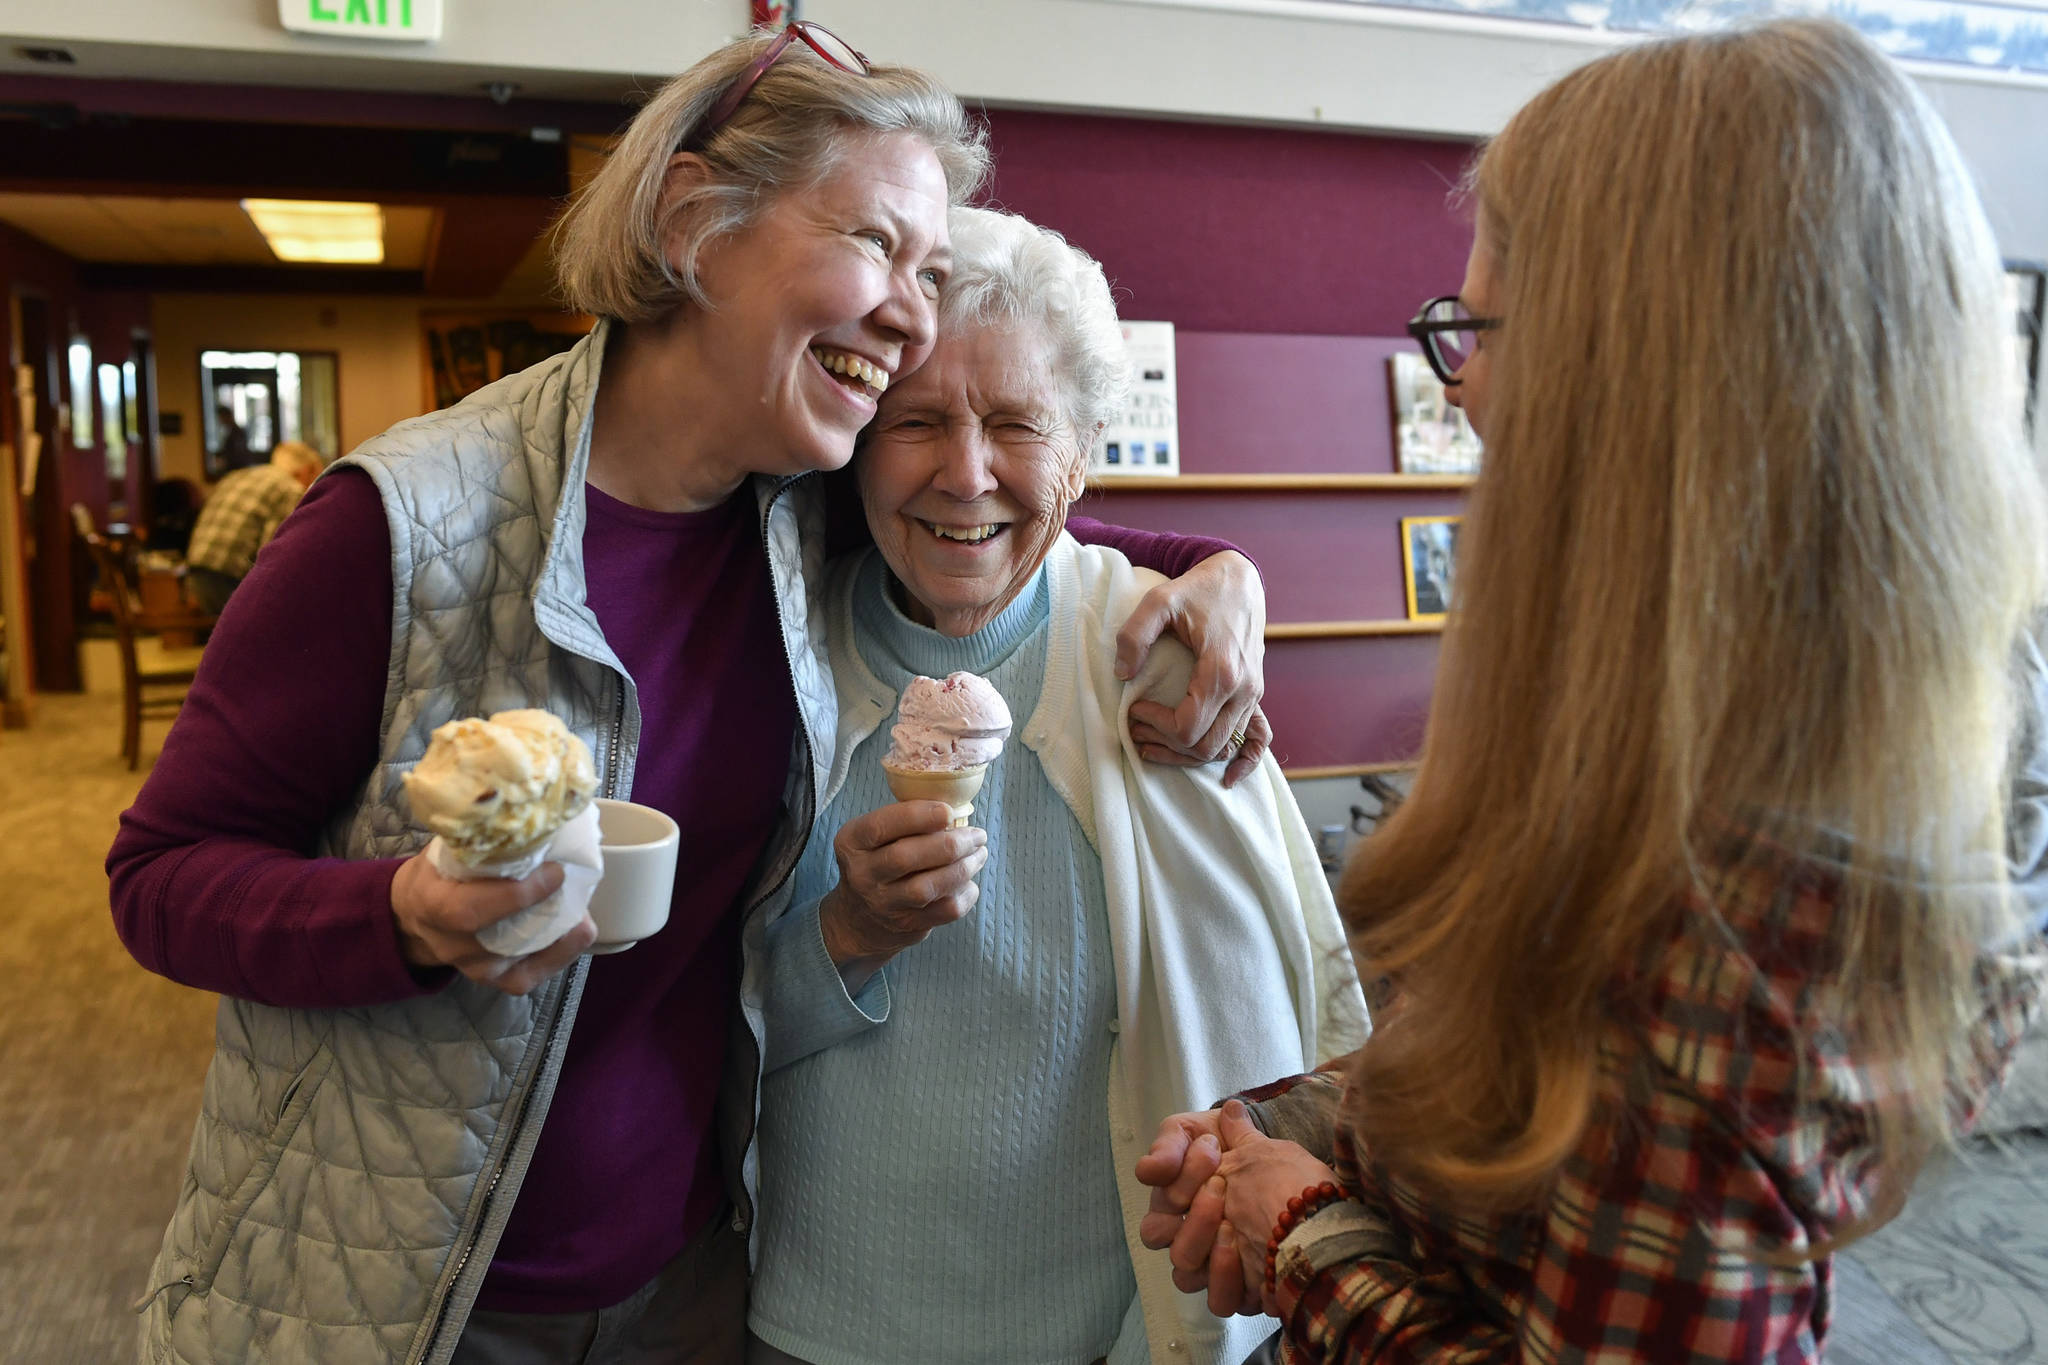 Margie Beedle, left, hugs her mother, Sally Thibodeau, as they chat with Alaska Pioneer Home employee Laura Minne during the home’s weekly ice cream social on Friday, March 8, 2019. (Michael Penn | Juneau Empire)